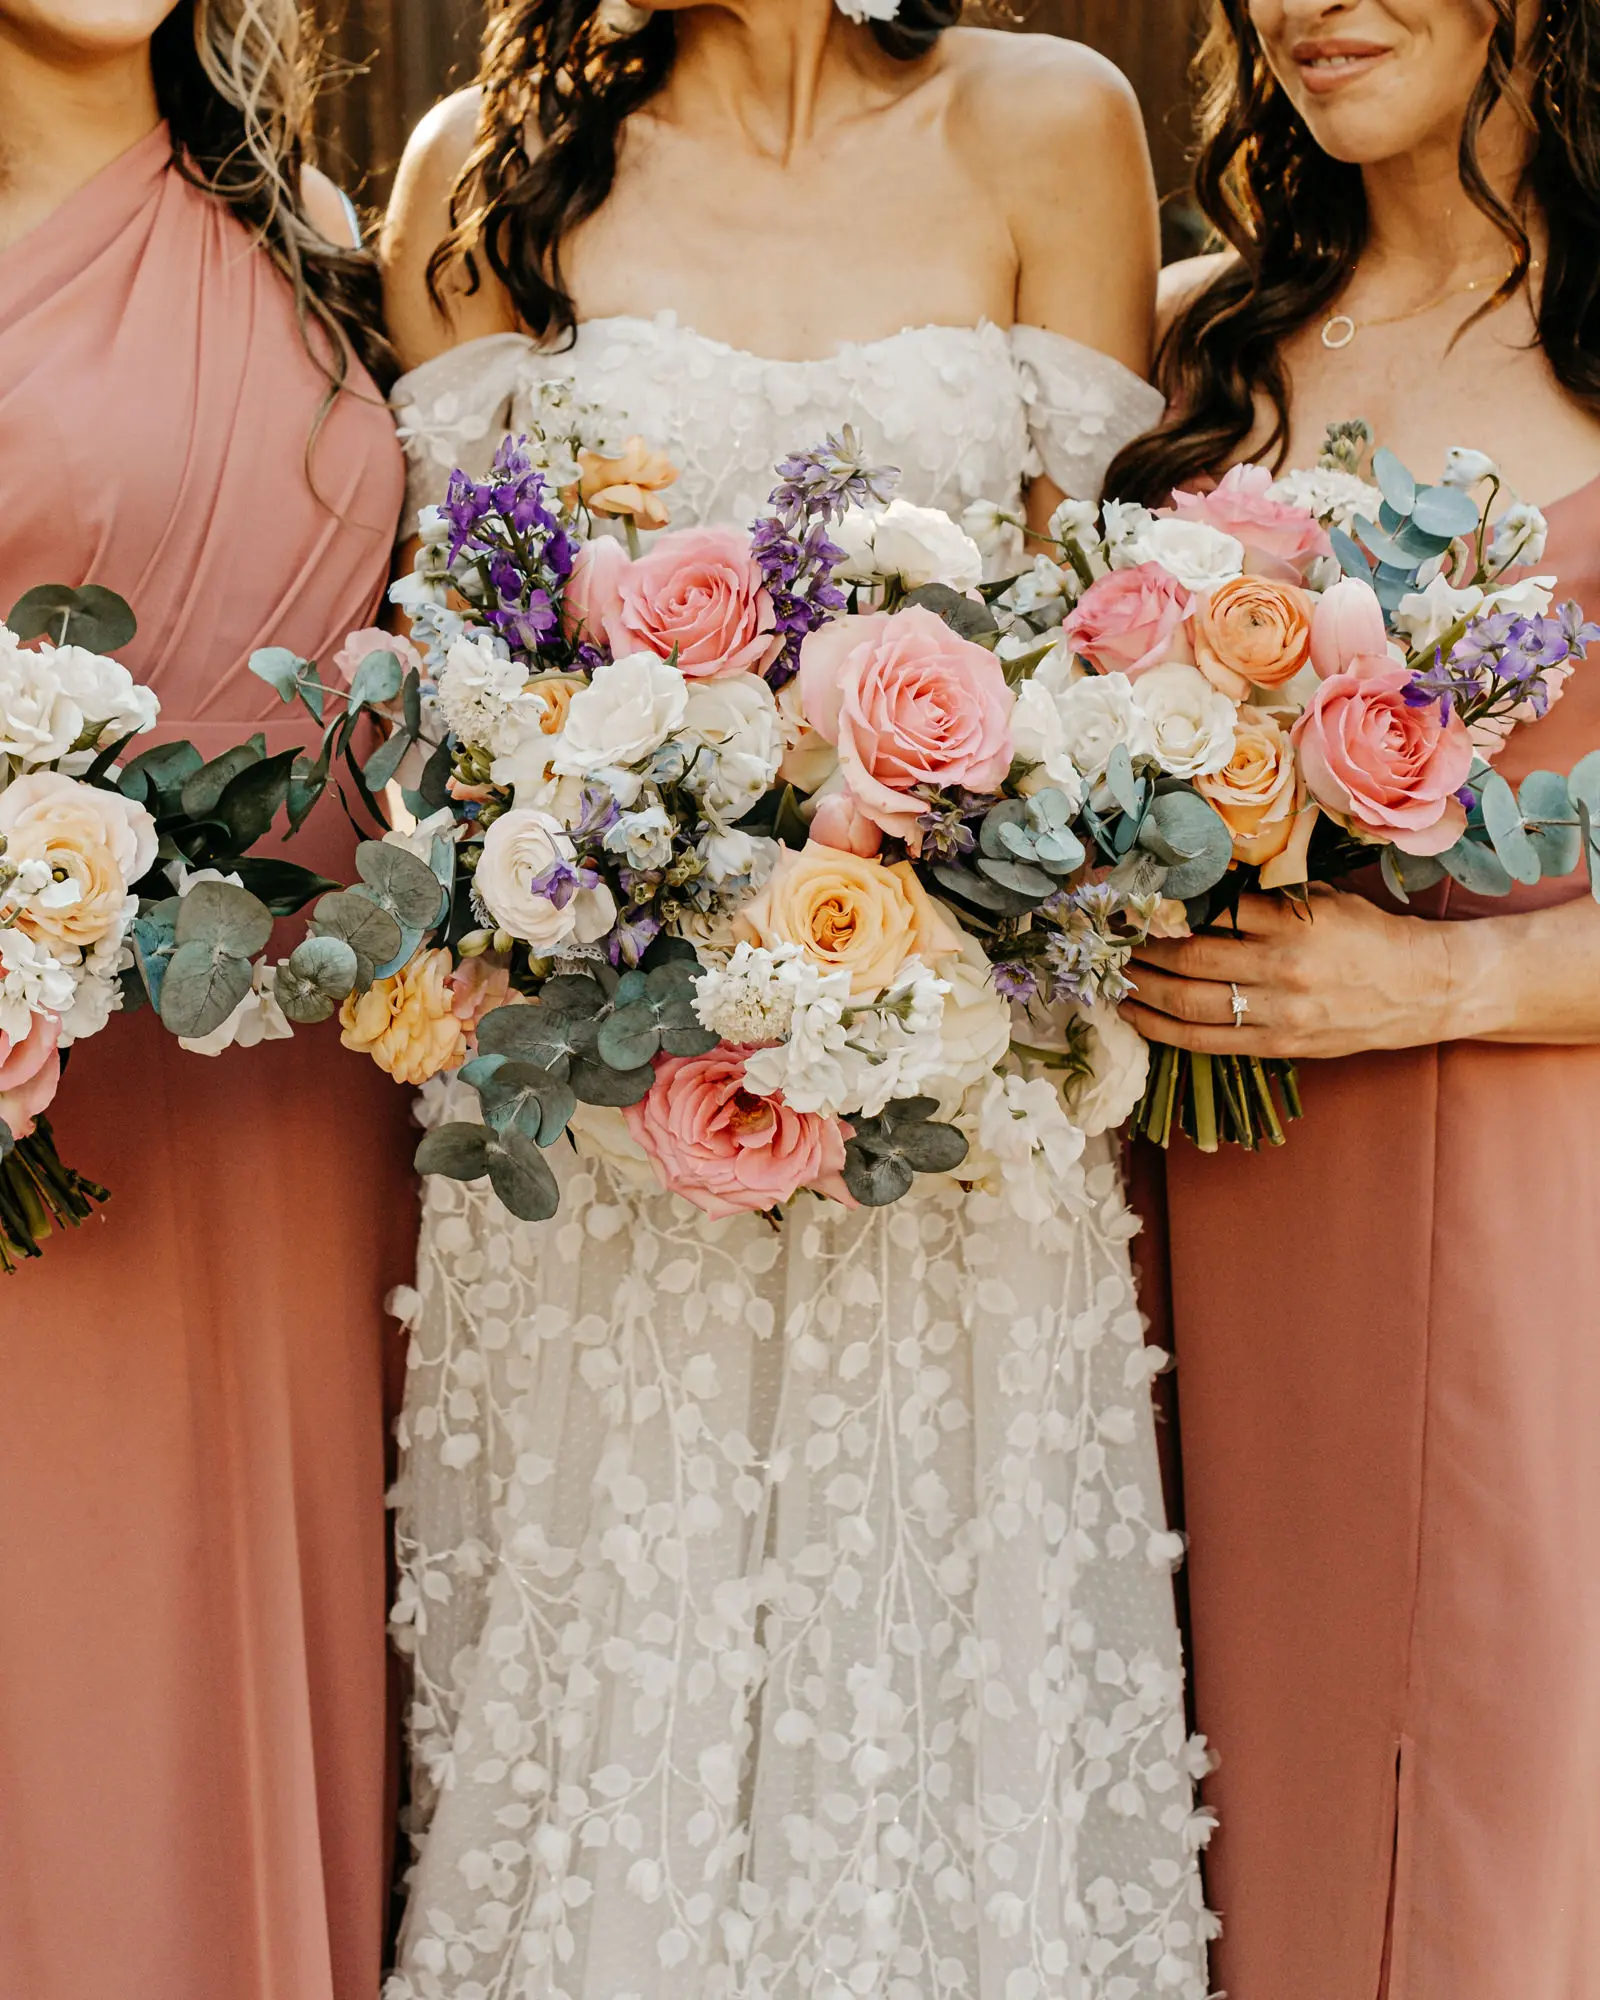 Spring Wedding Bouquet Ideas | Pink and Orange Roses, White Hydrangeas, Purple Flowers, and Greenery Floral Arrangement Inspiration | Tampa Bay Florist Monarch Events